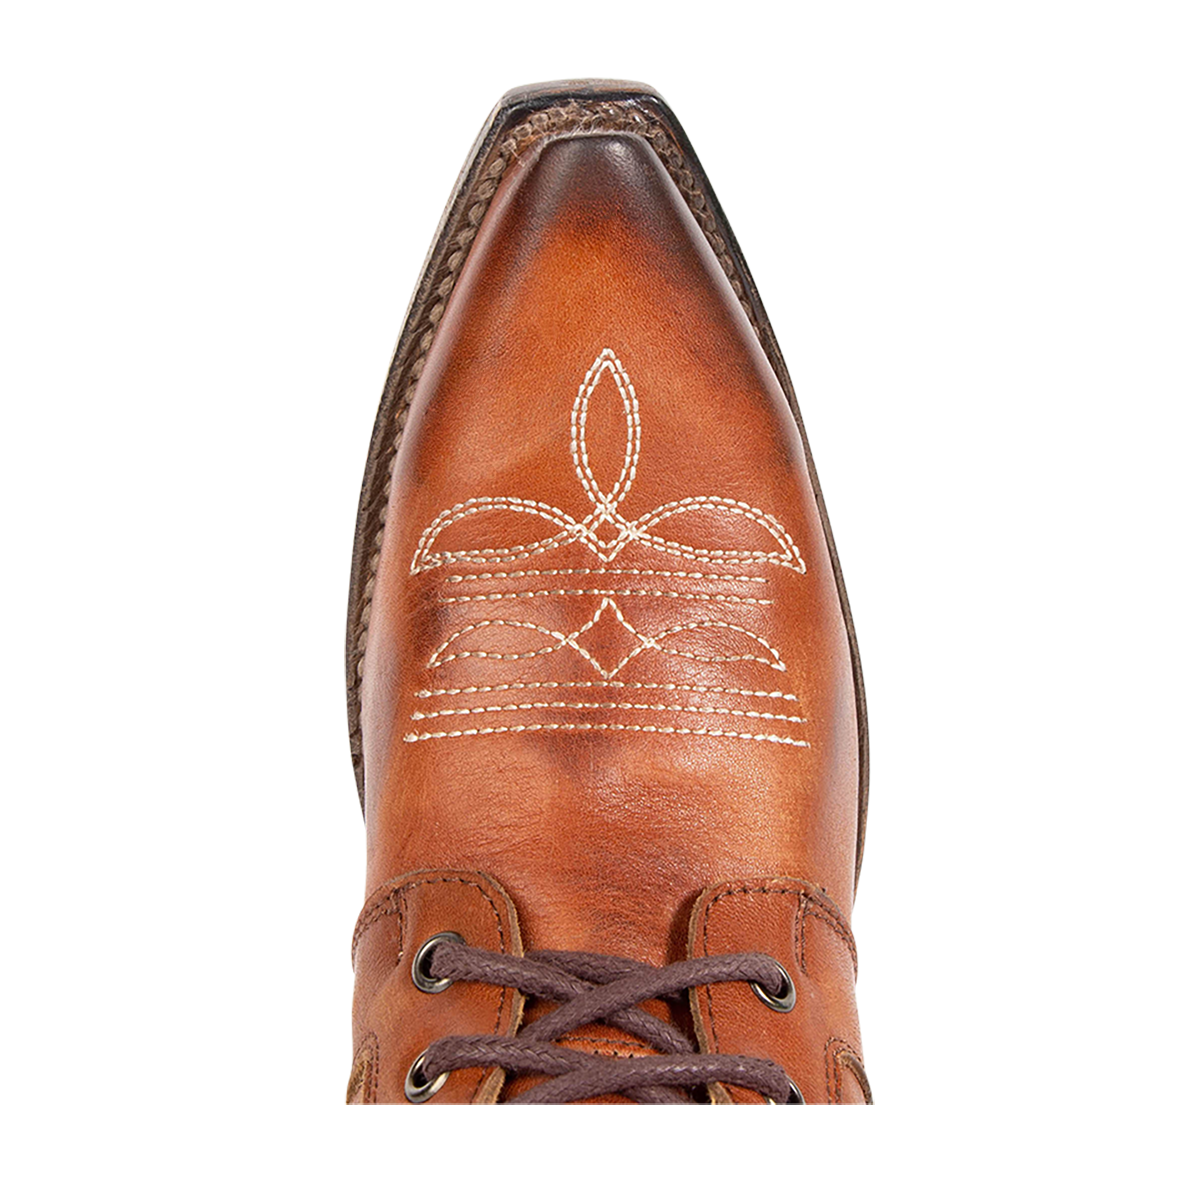 Top view showing snip toe and contrasting stitch detailing on FREEBIRD women's Wilder whiskey boot